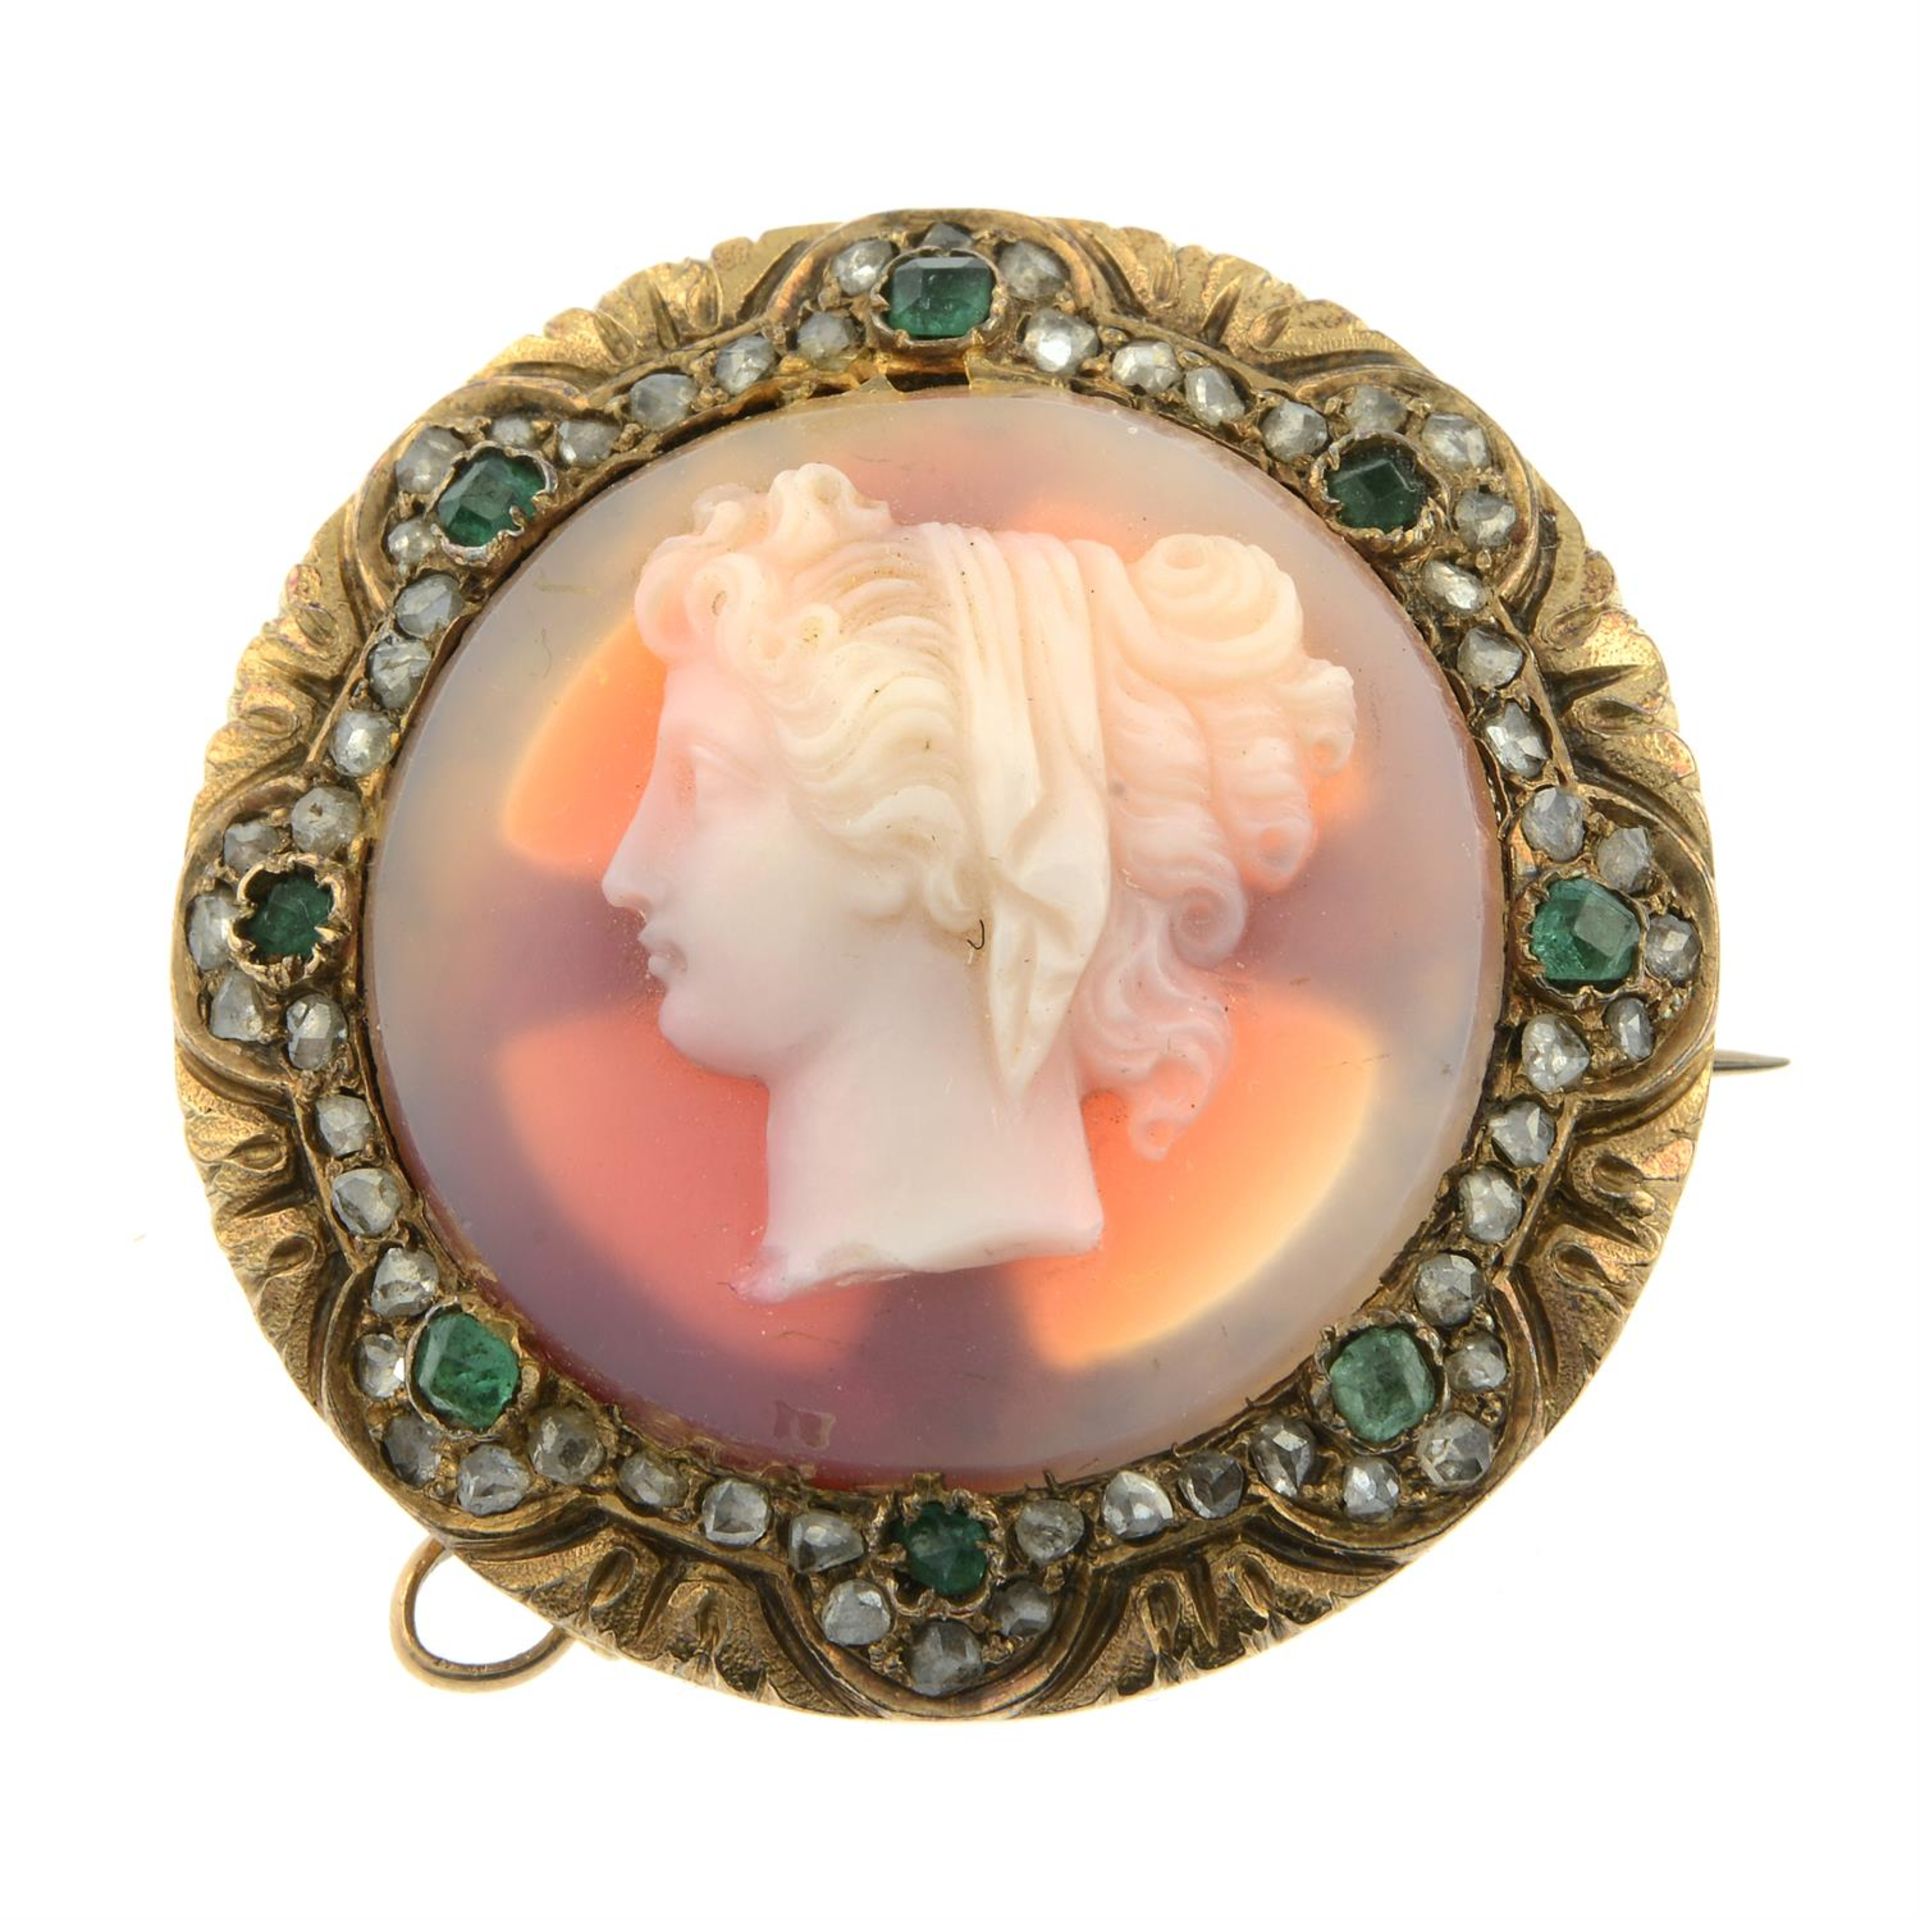 A mid Victorian gold sardonyx cameo brooch, depicting Hera in profile, with emerald and rose-cut - Image 2 of 4